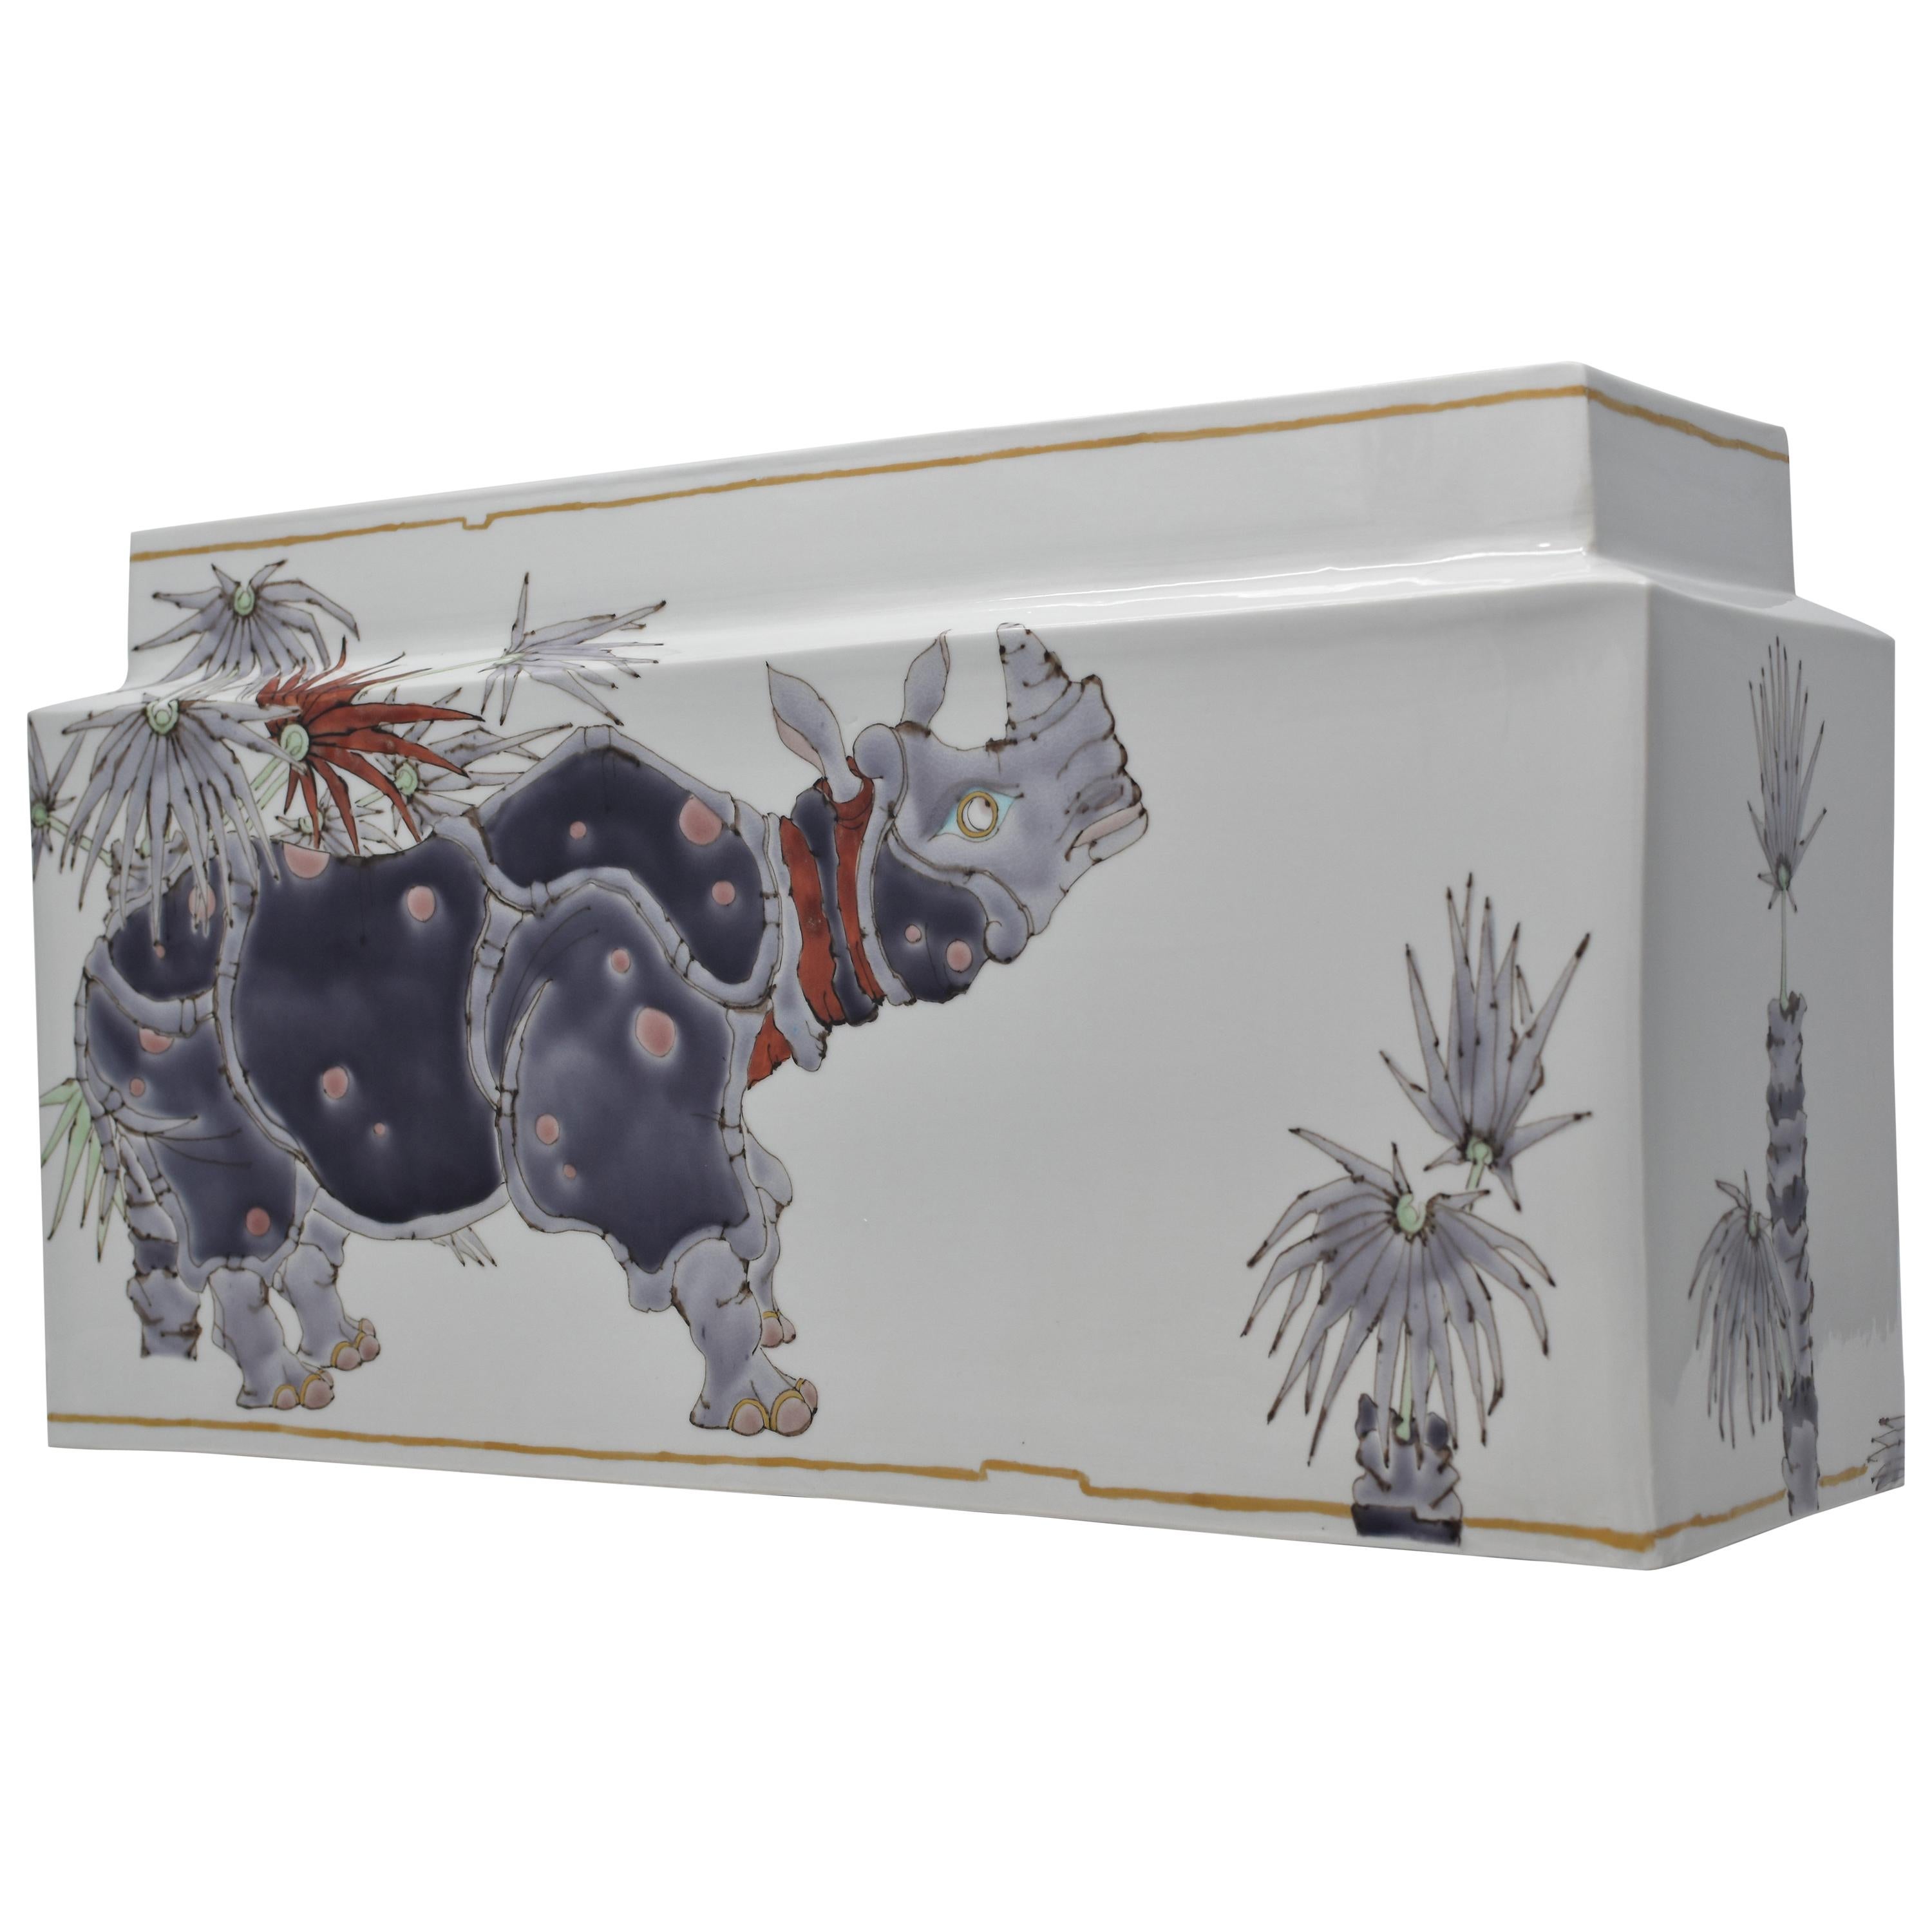 Extraordinary museum quality Japanese contemporary signed decorative porcelain vase, stunningly hand painted on an elegant rectangular body in vivid hues of purple, red and gray, with a unique interpretation of rhinoceros. The highly acclaimed